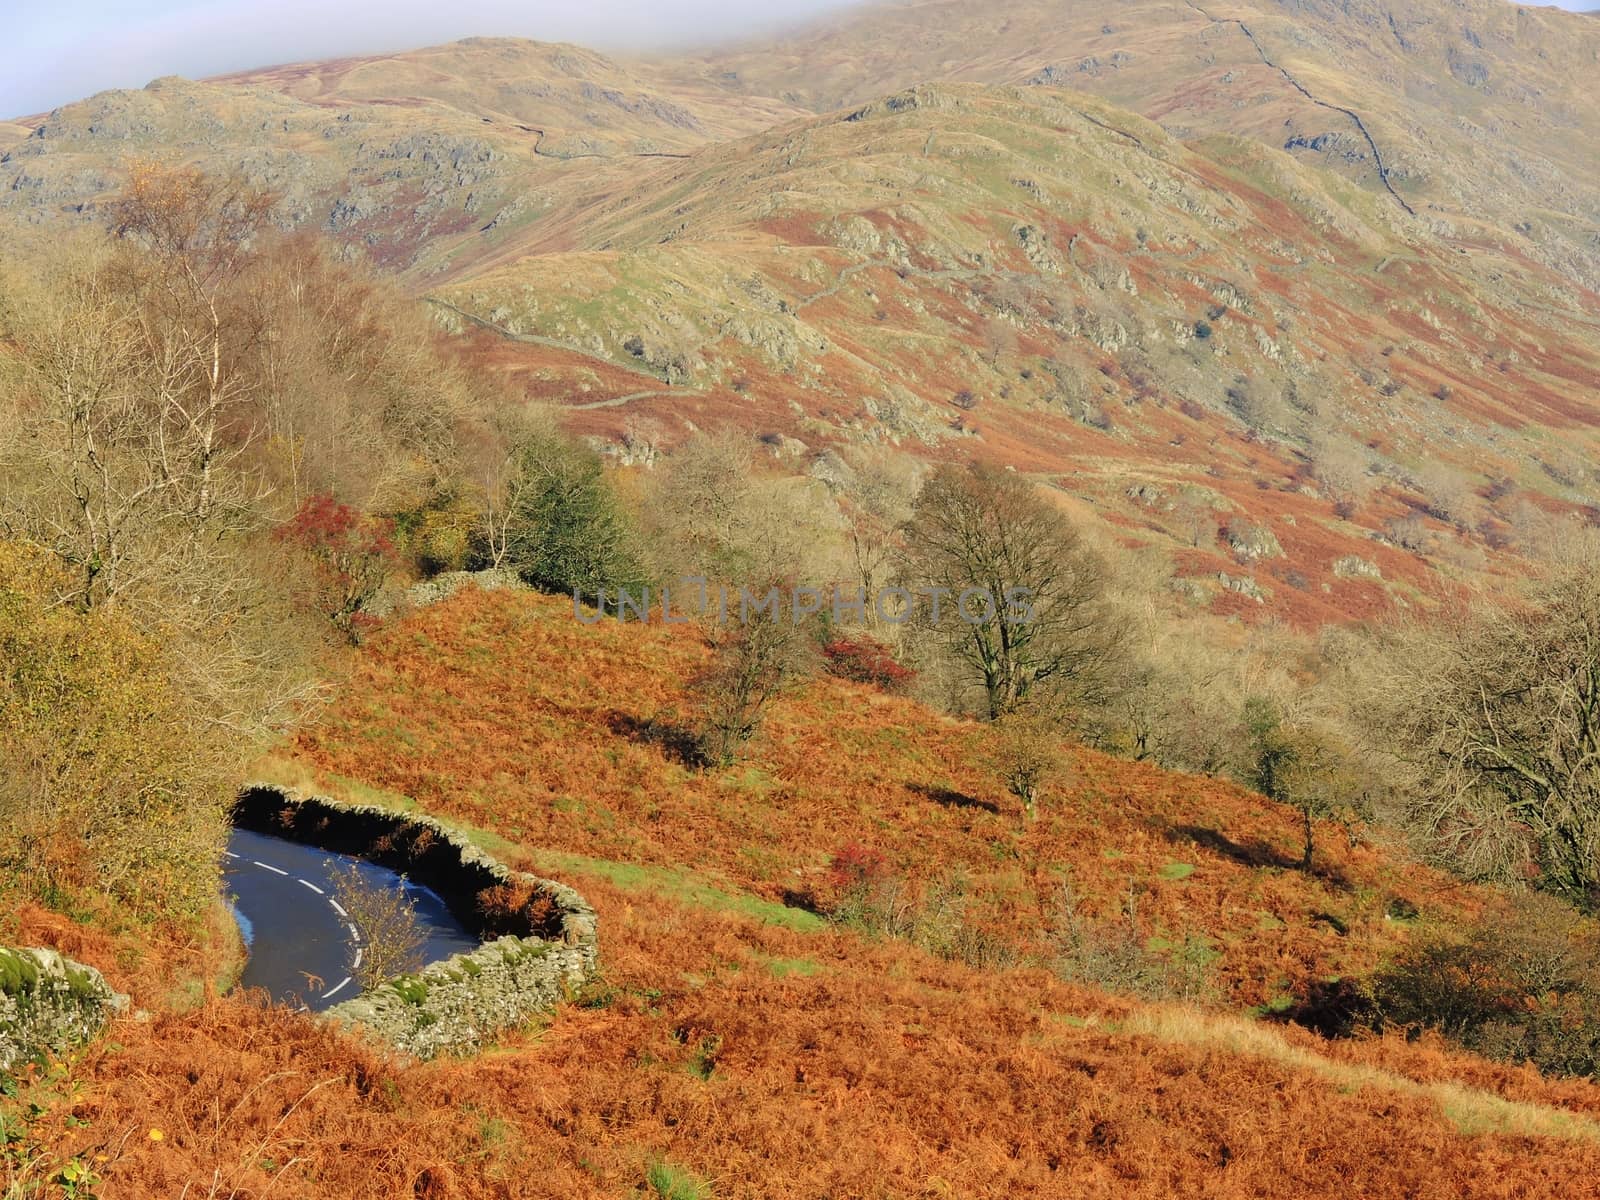 A colourful image from the Troutbeck valley in the English Lake District.